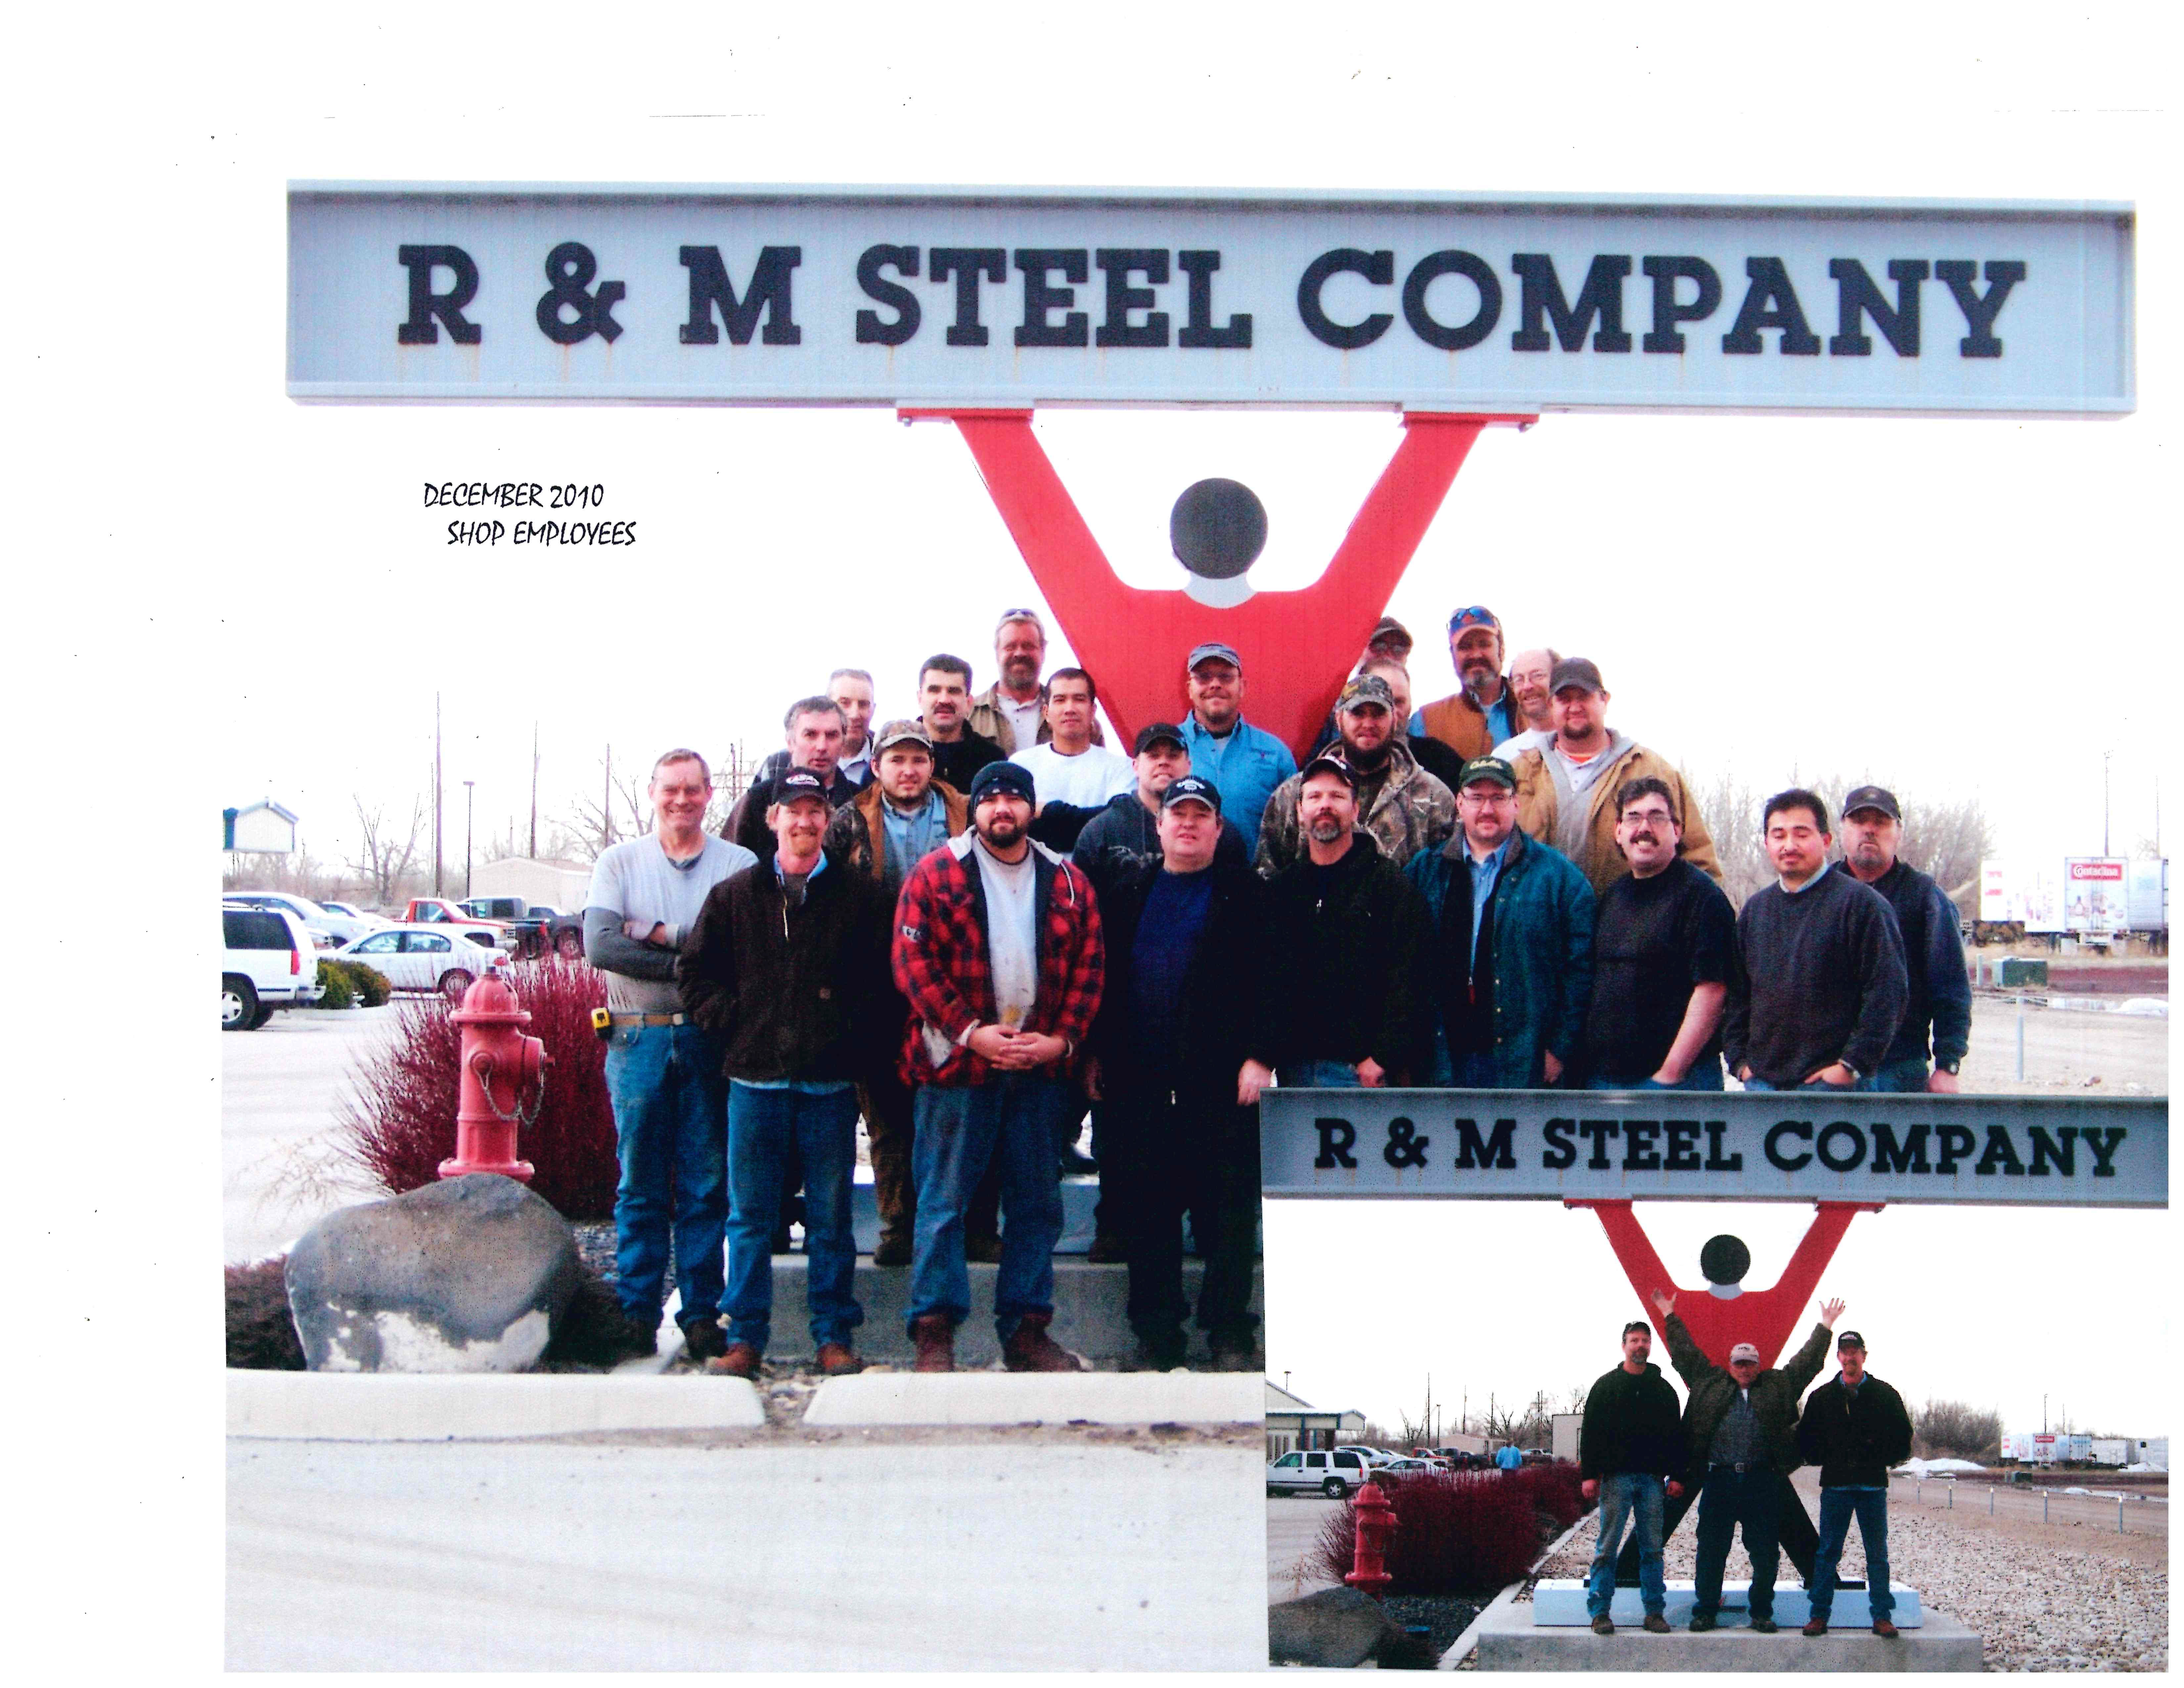 R & M STEEL PICTURE-SHOP AT THE SIGN